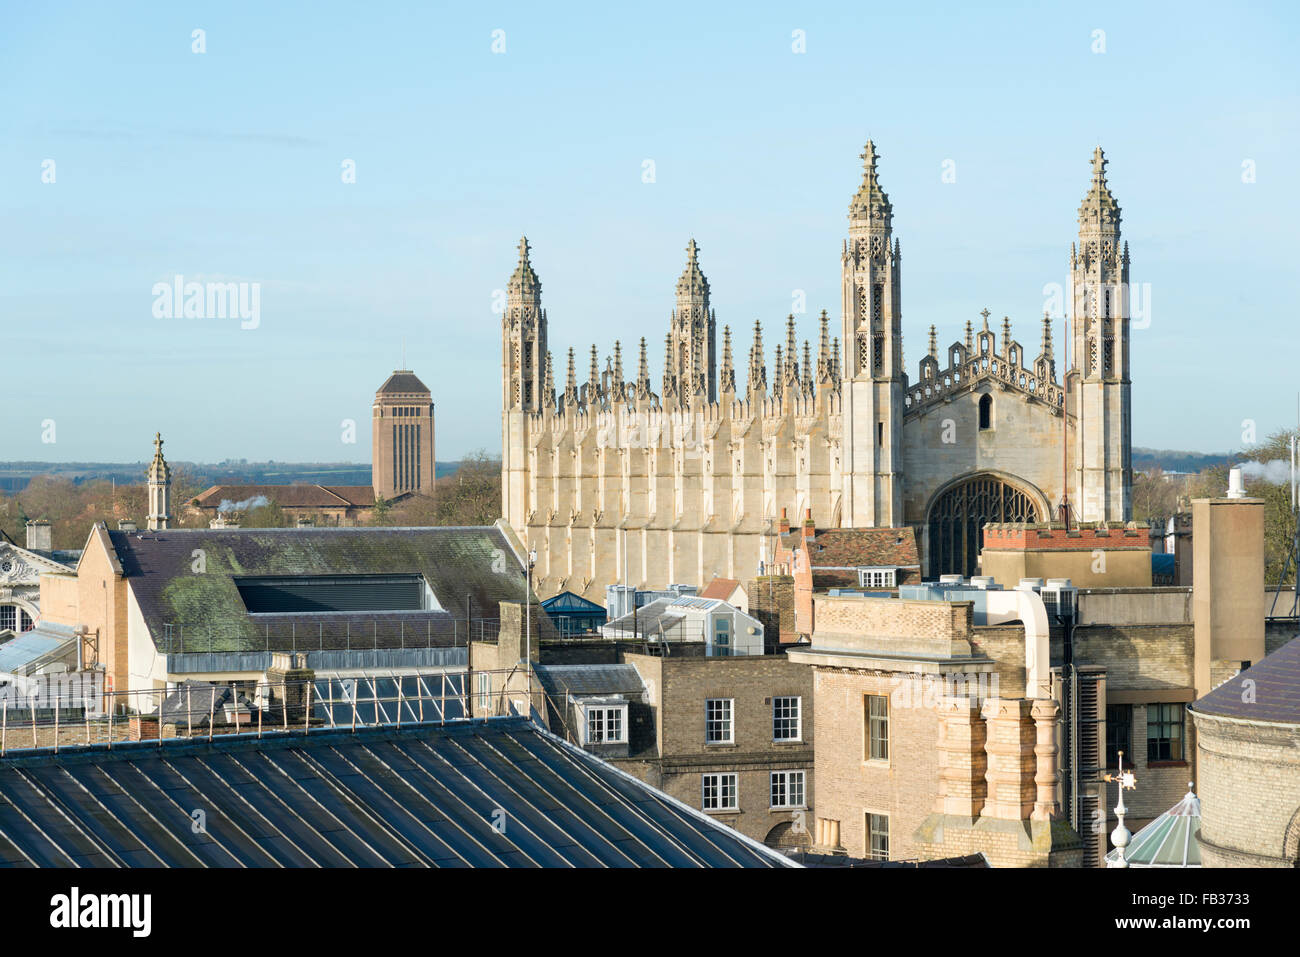 Rooftops and skyline in Cambridge UK showing Kings College chapel and other buildings Stock Photo